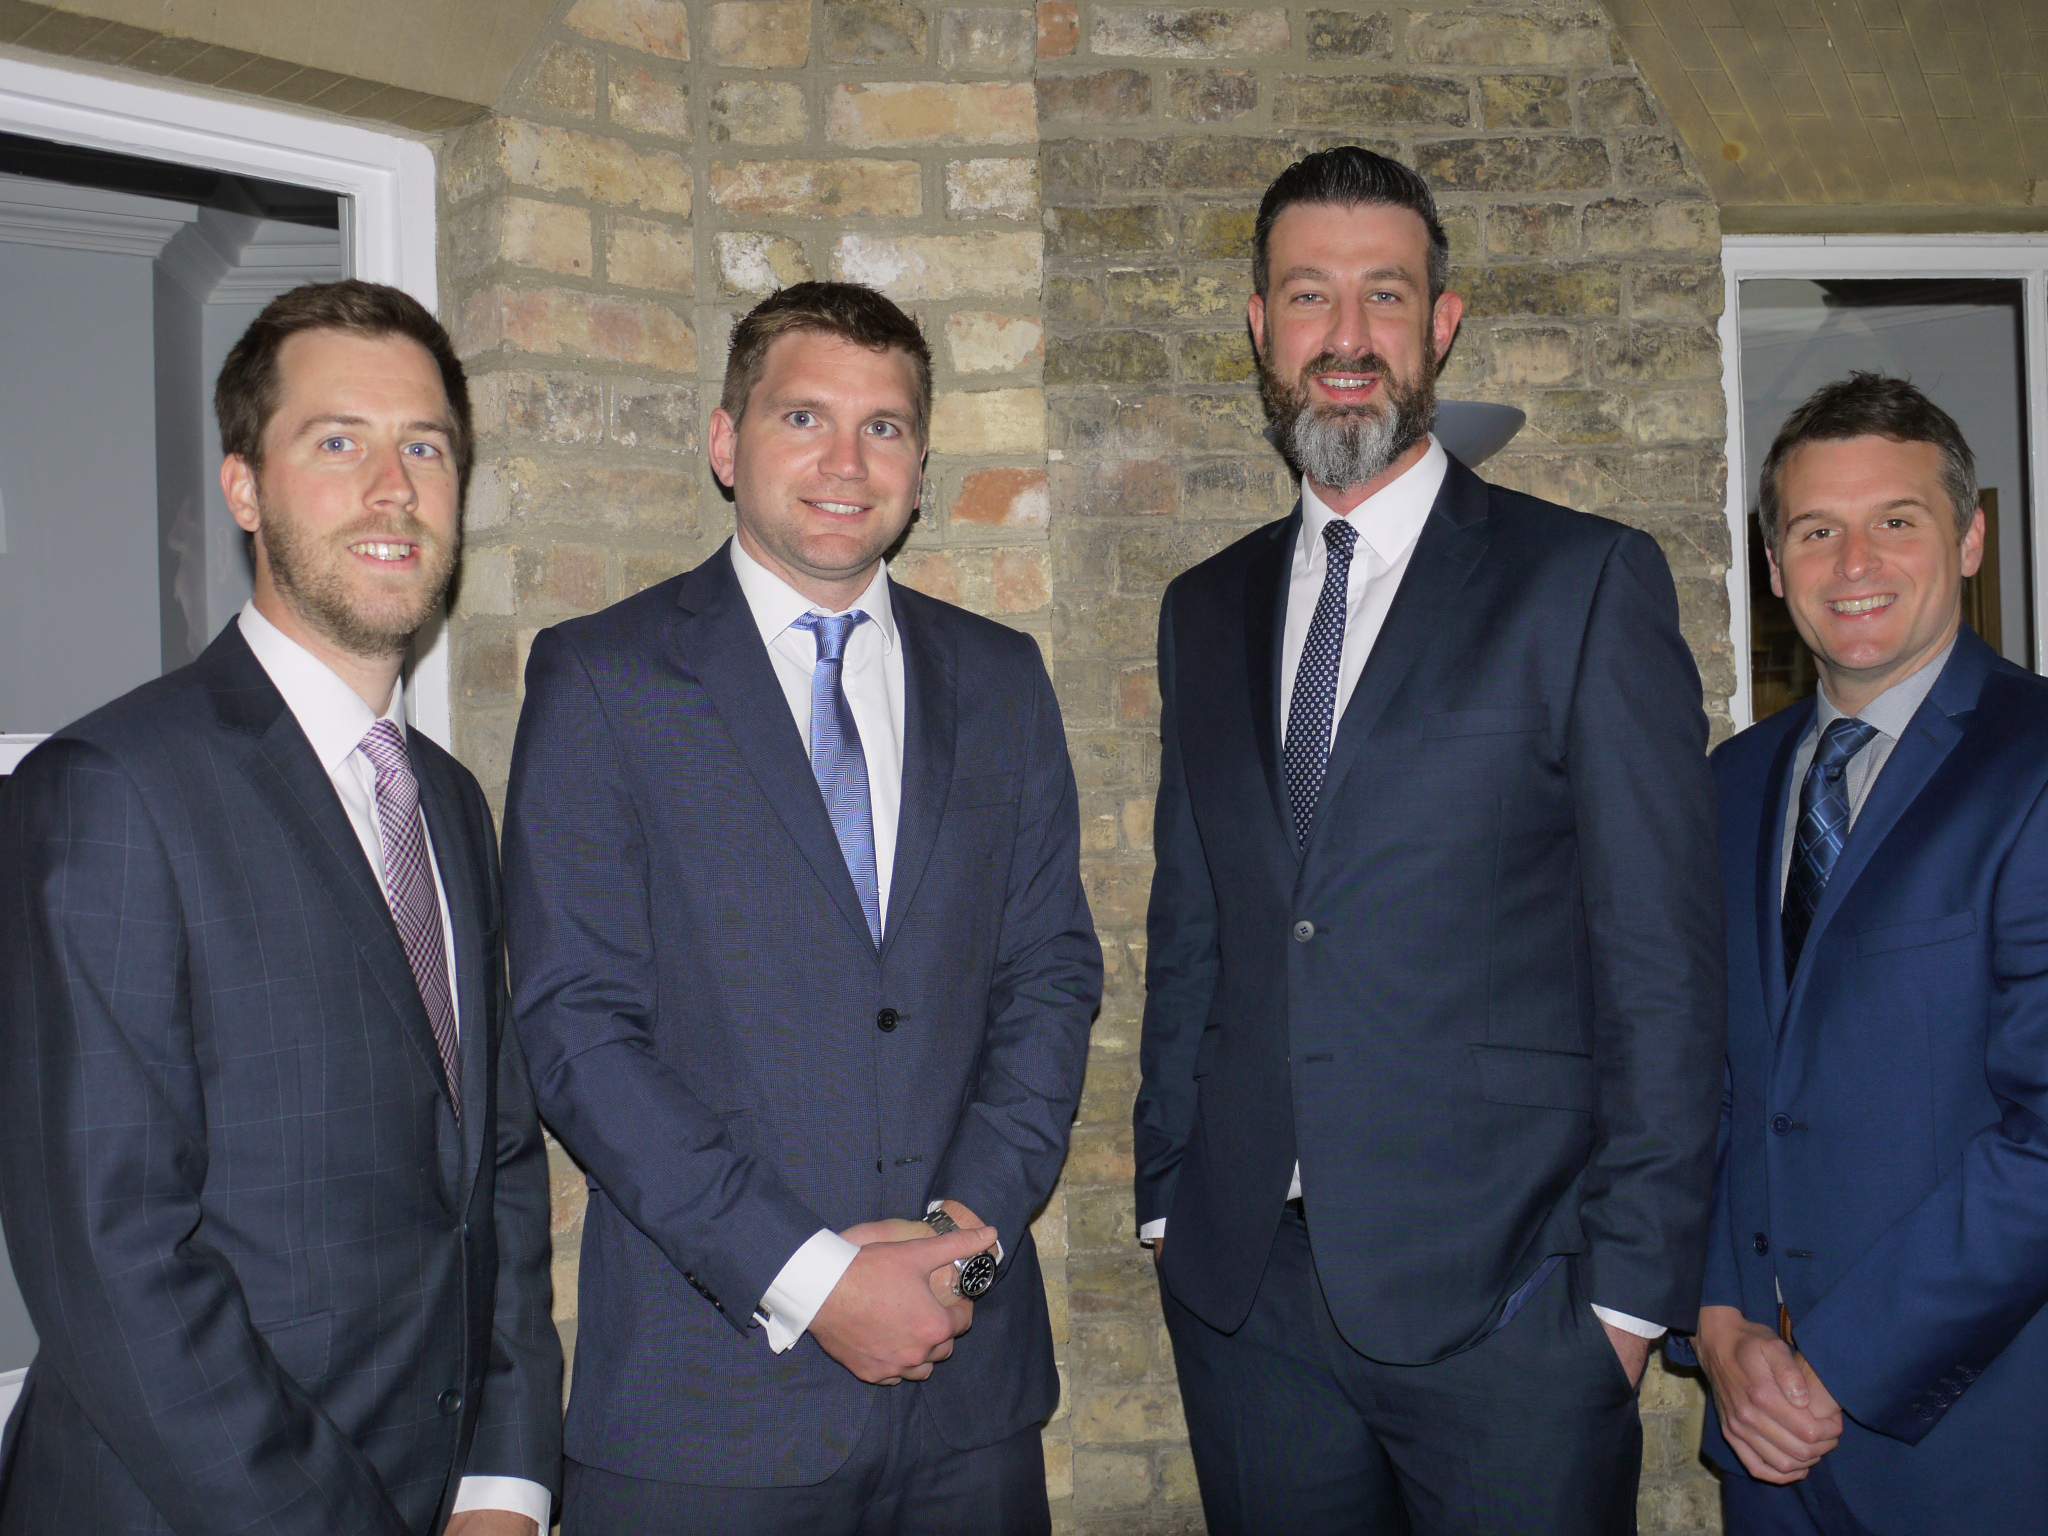 PPH PROMOTES FOUR MEMBERS OF ITS HULL TEAM